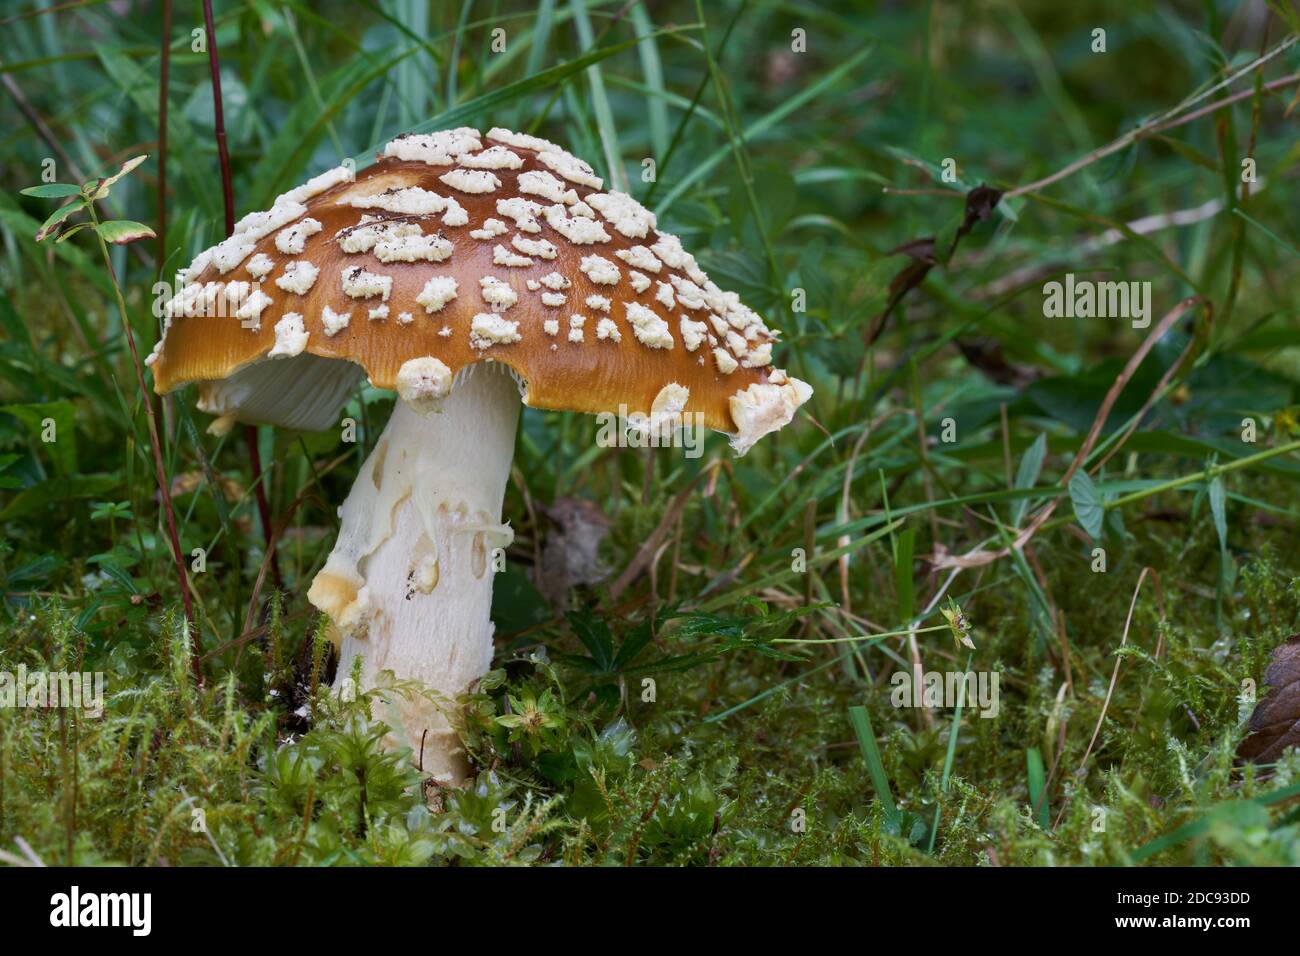 Poisonous mushroom Amanita regalis in the wet spruce forest. Known as royal fly agaric or king of Sweden Amanita. Wild mushroom growing in the moss. Stock Photo